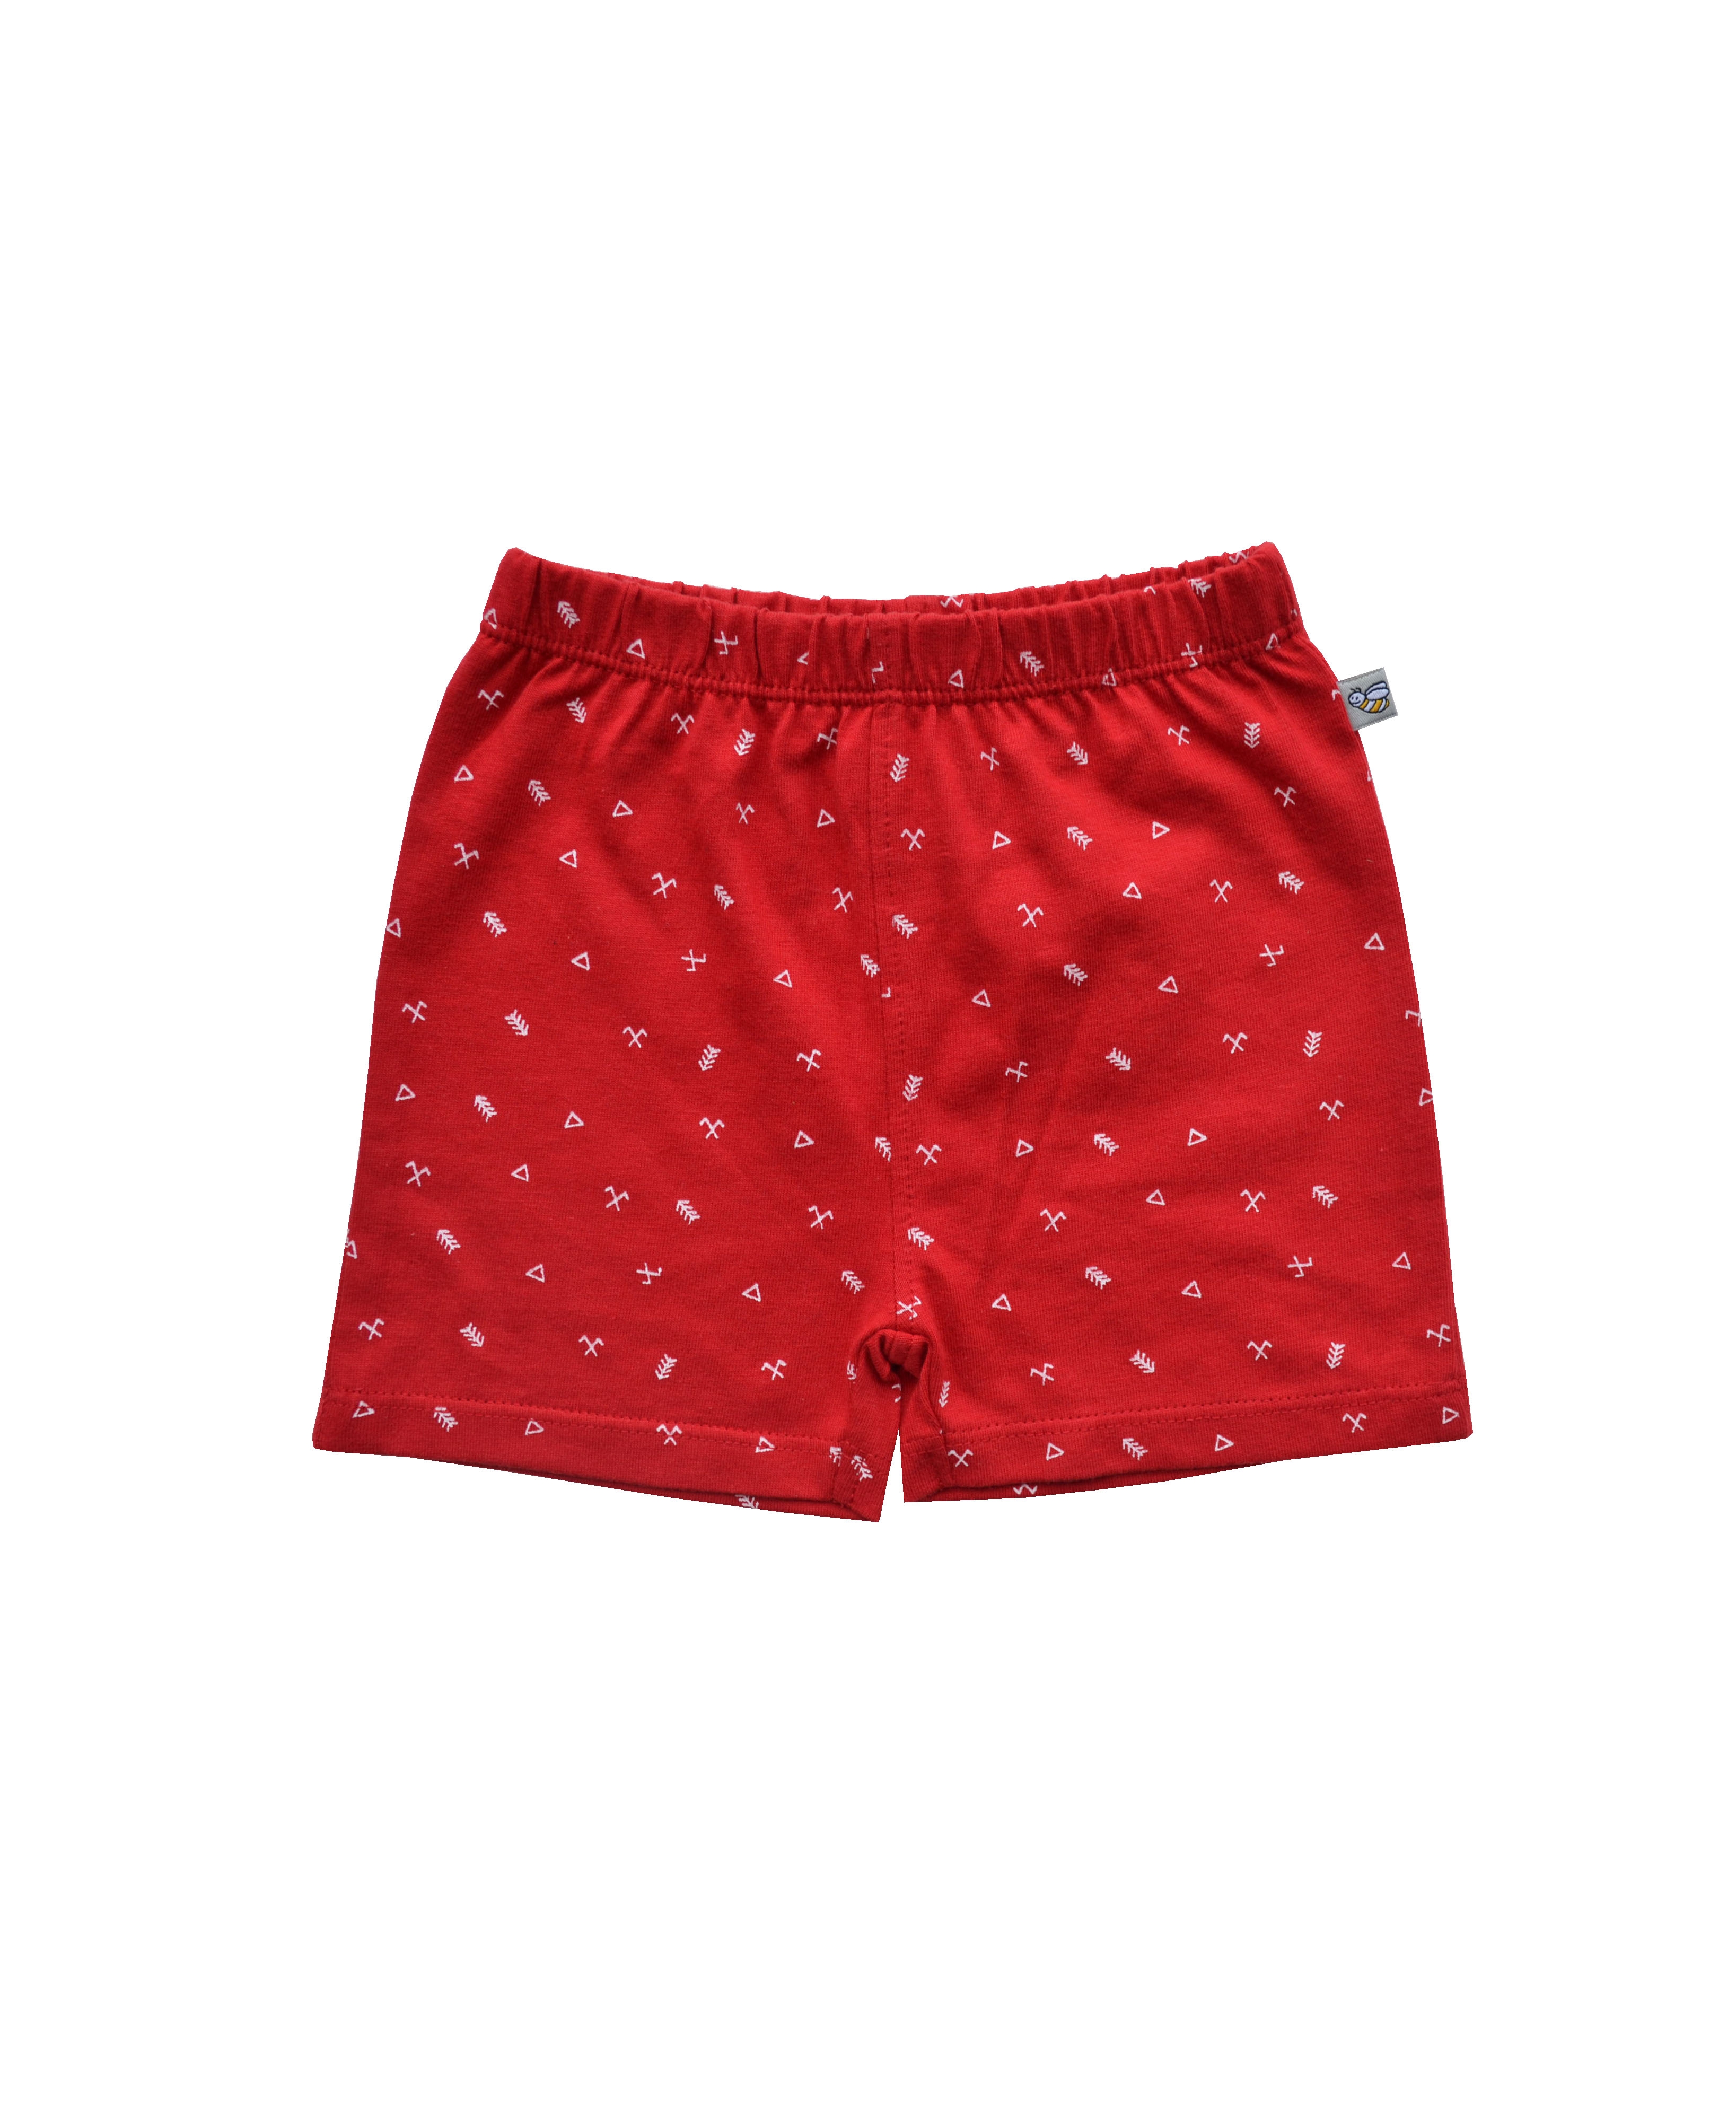 Babeez | Allover Print On Red Boys Shorts (100% Cotton Jersey) undefined